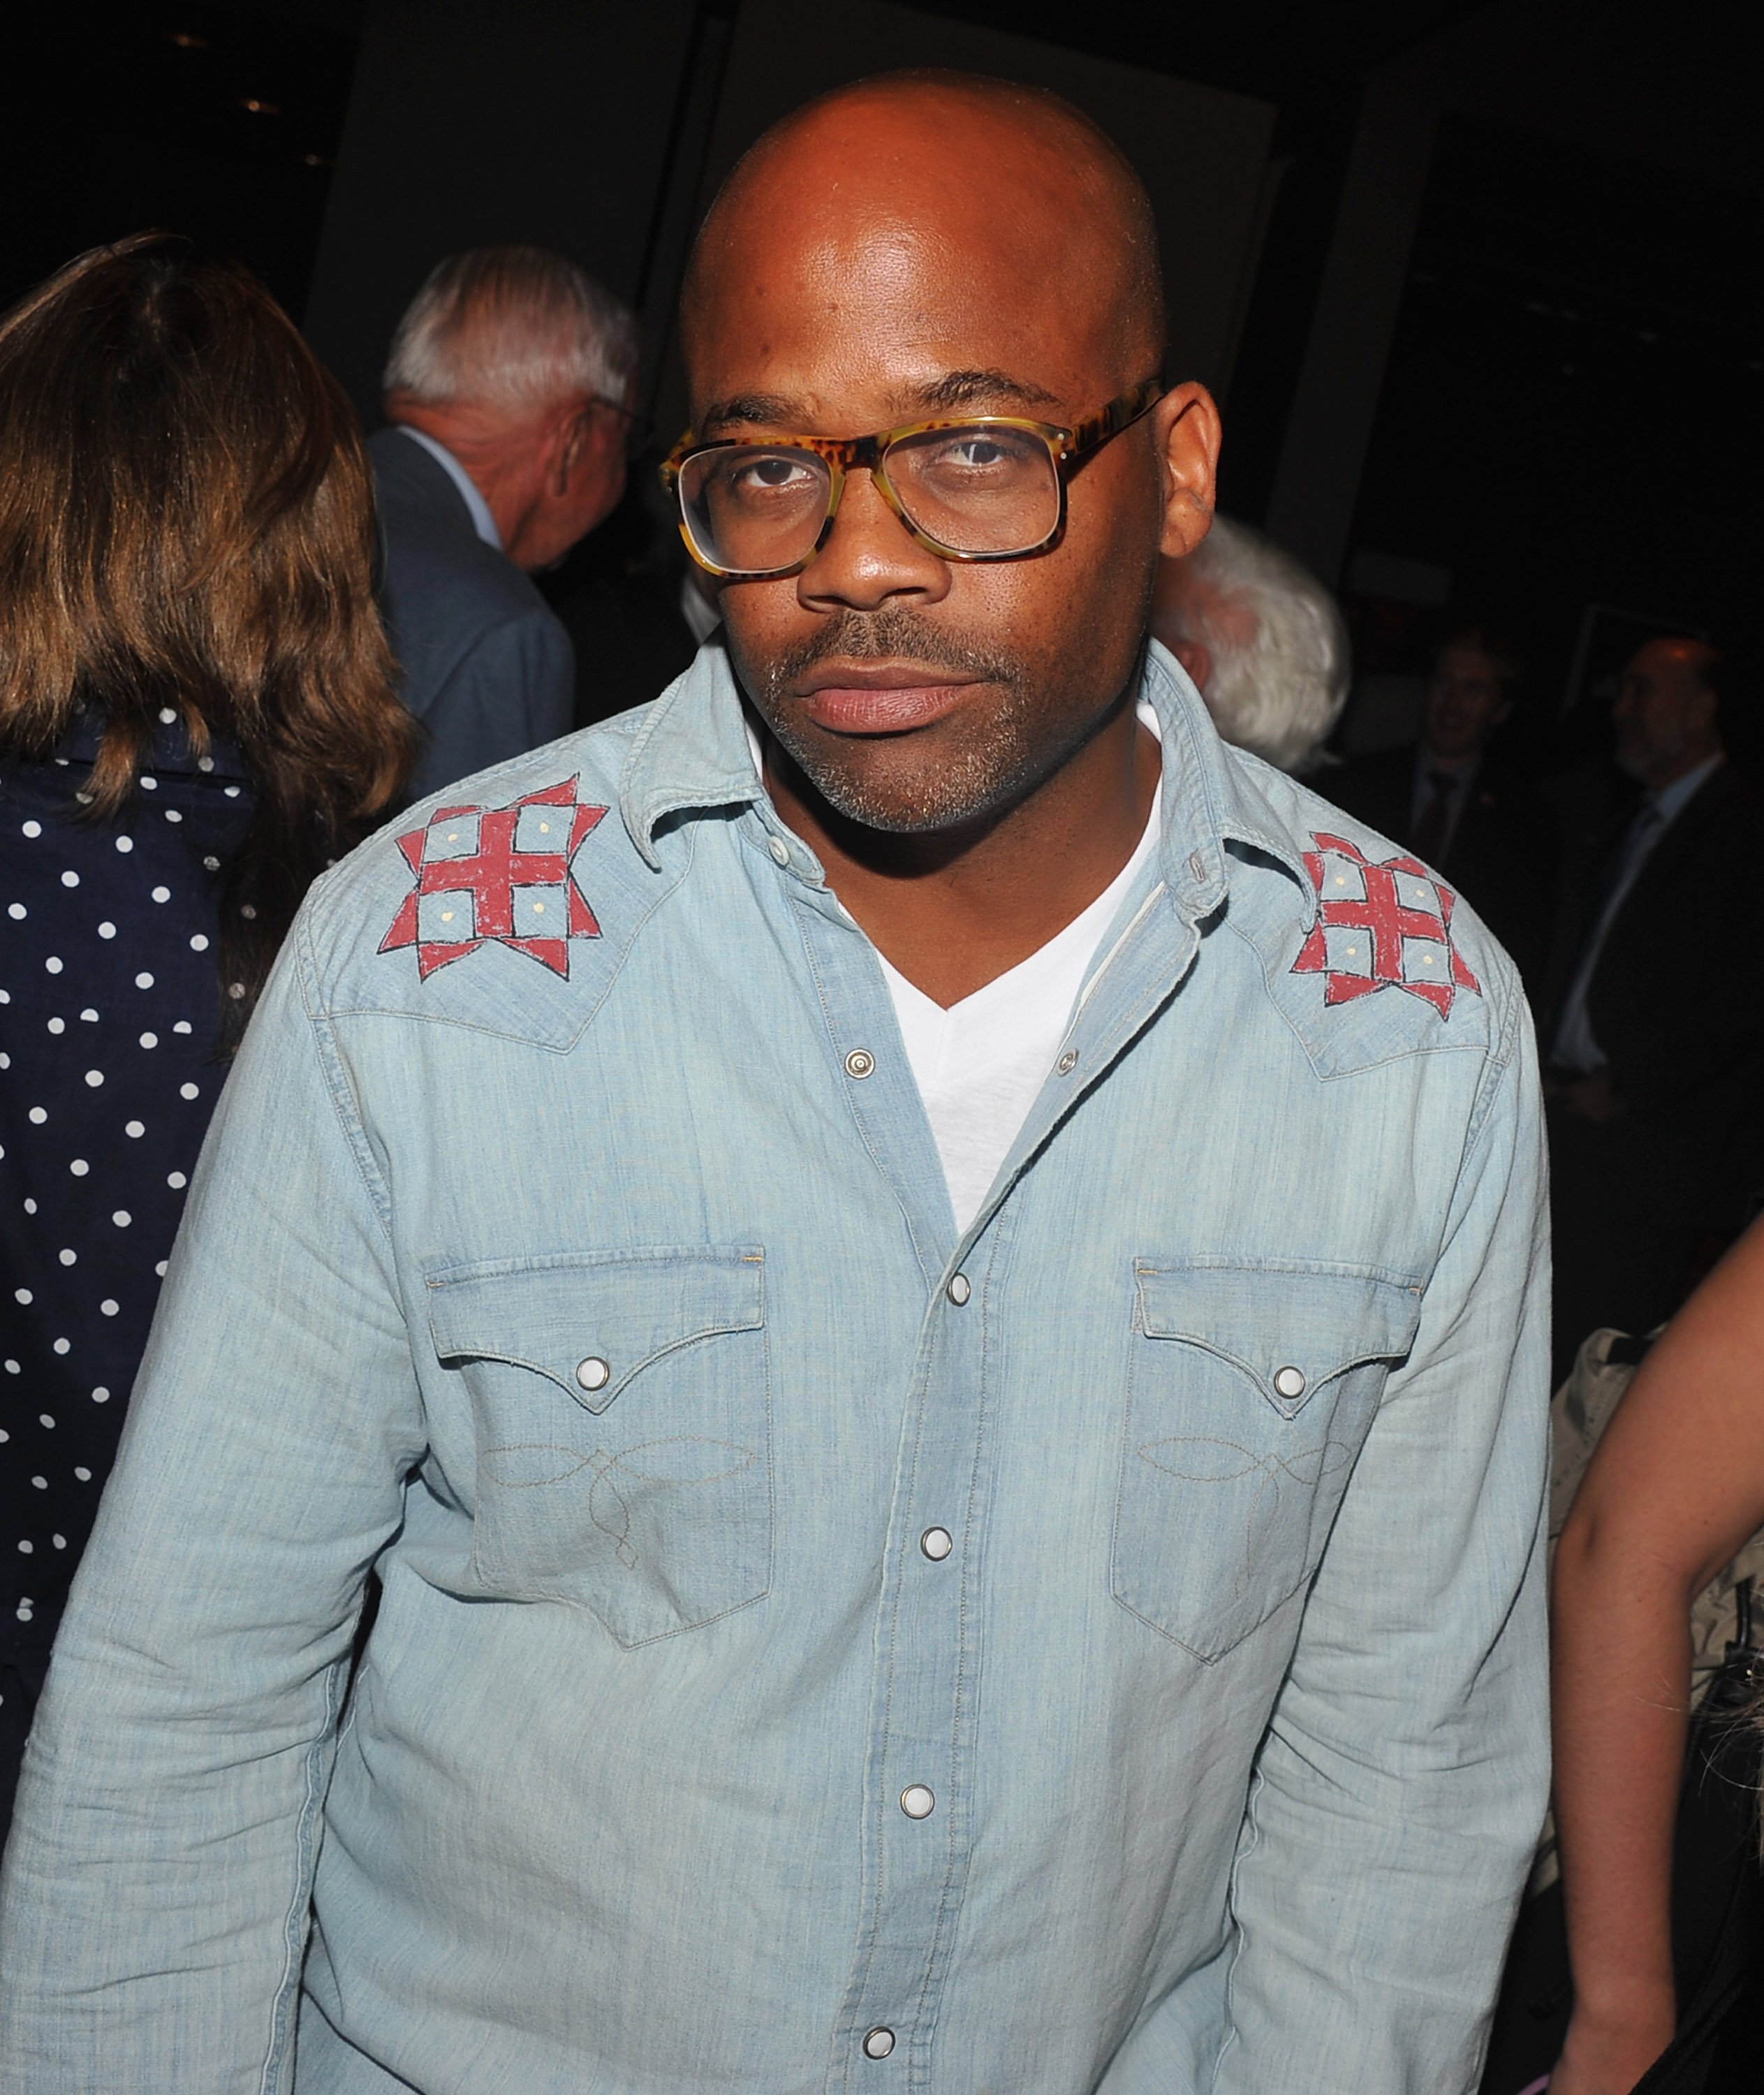 Damon Dash during a screening party in New York in August 2011. | Photo: Getty Images